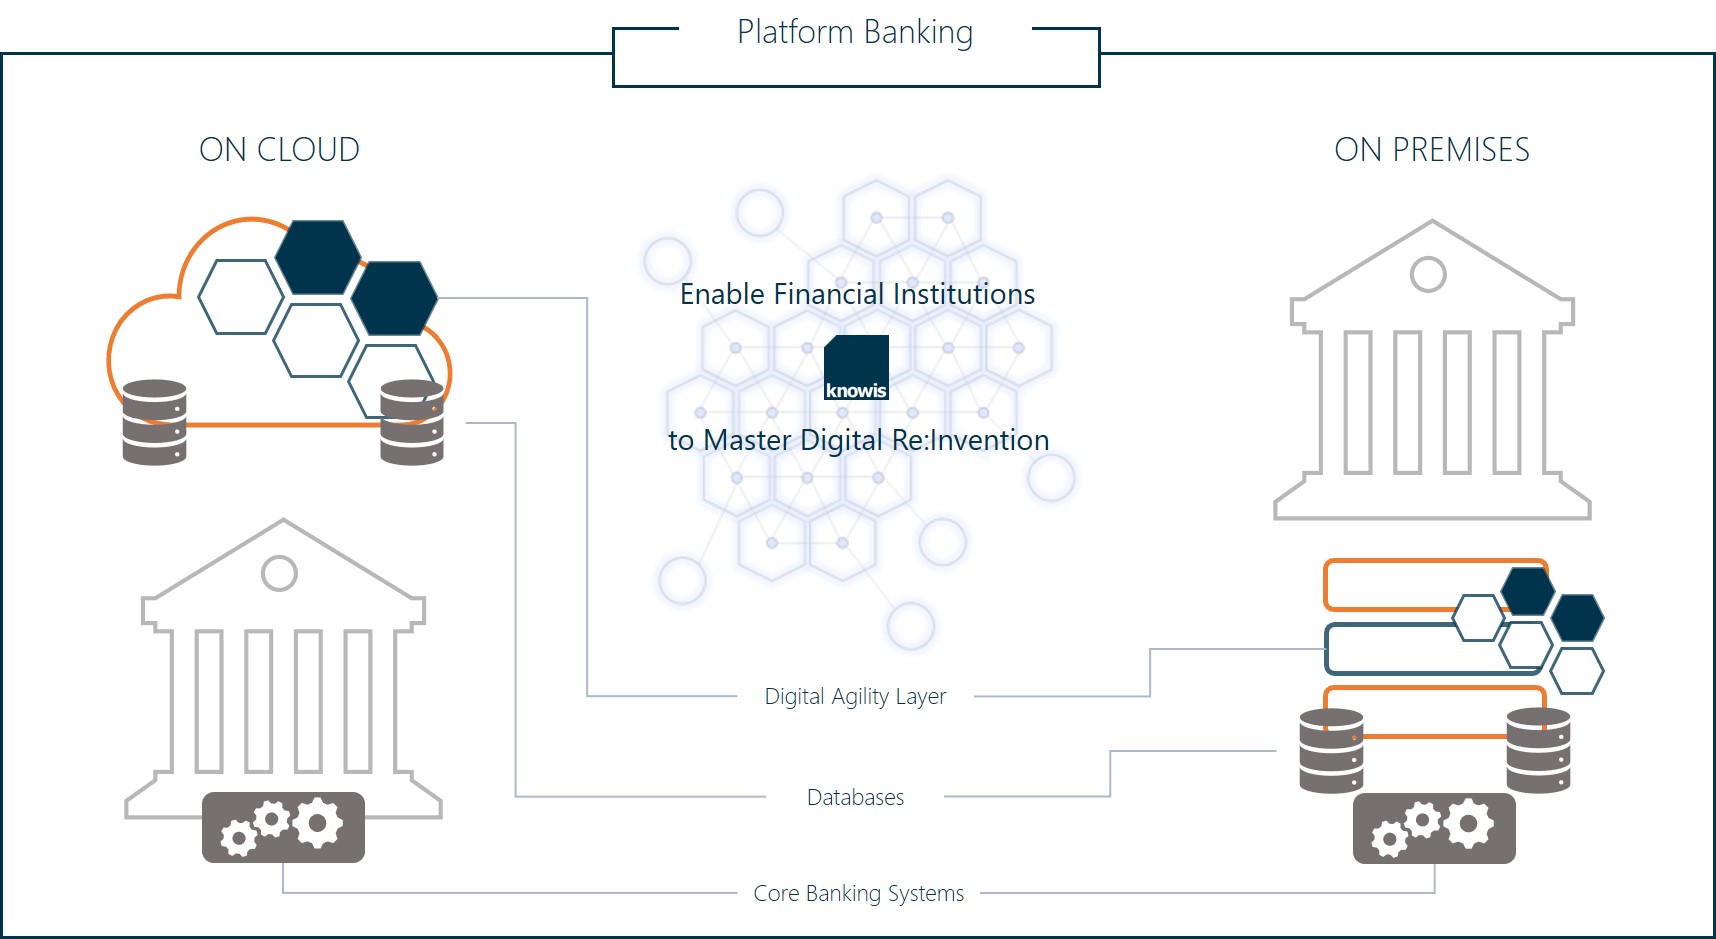 Banking Platform on Cloud: New Perspectives for Financial Services